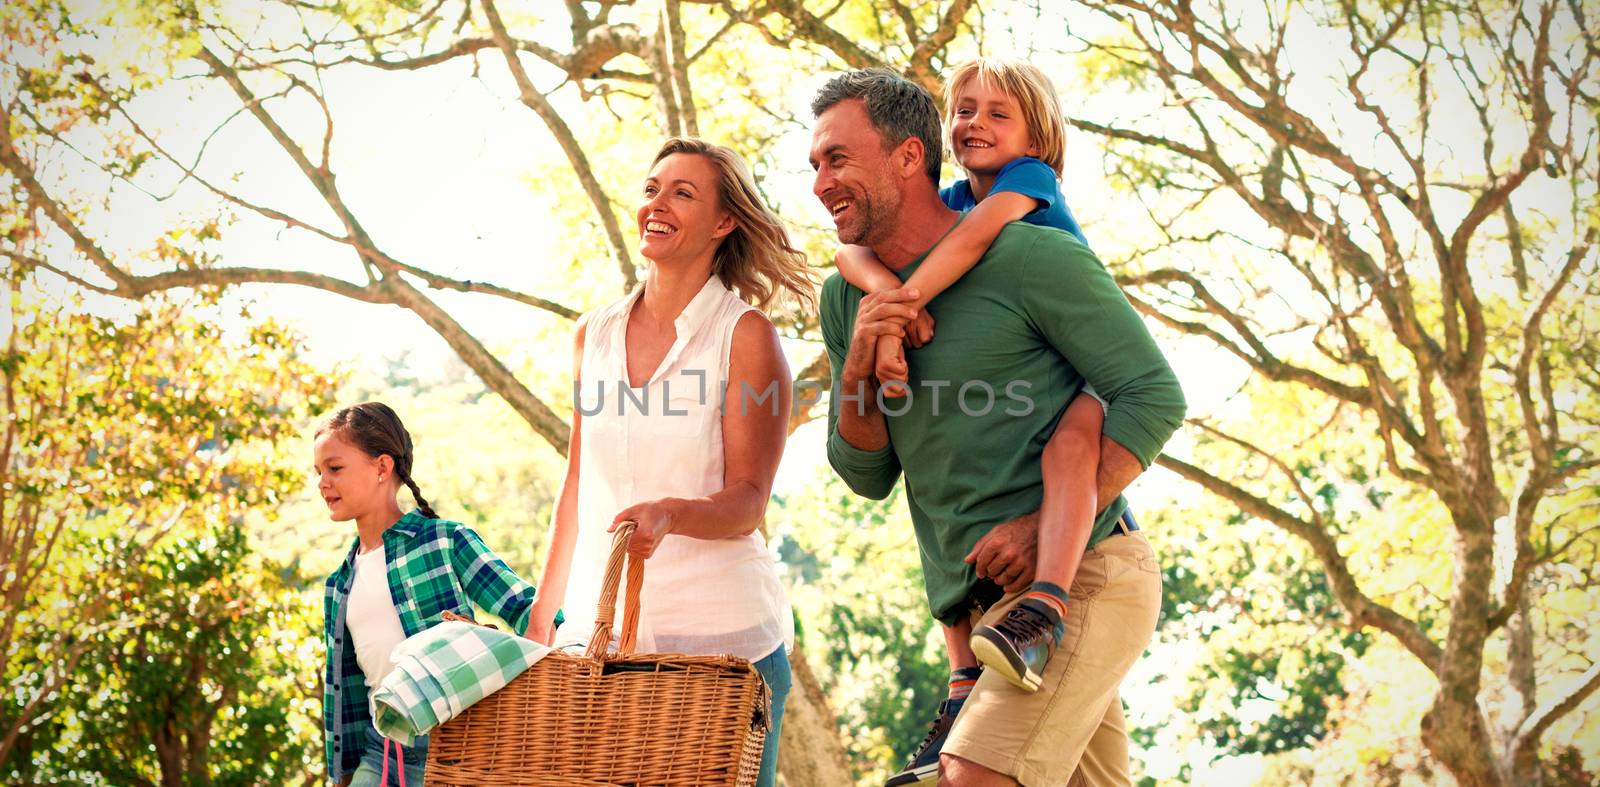 Happy family arriving in the park for picnic on a sunny day